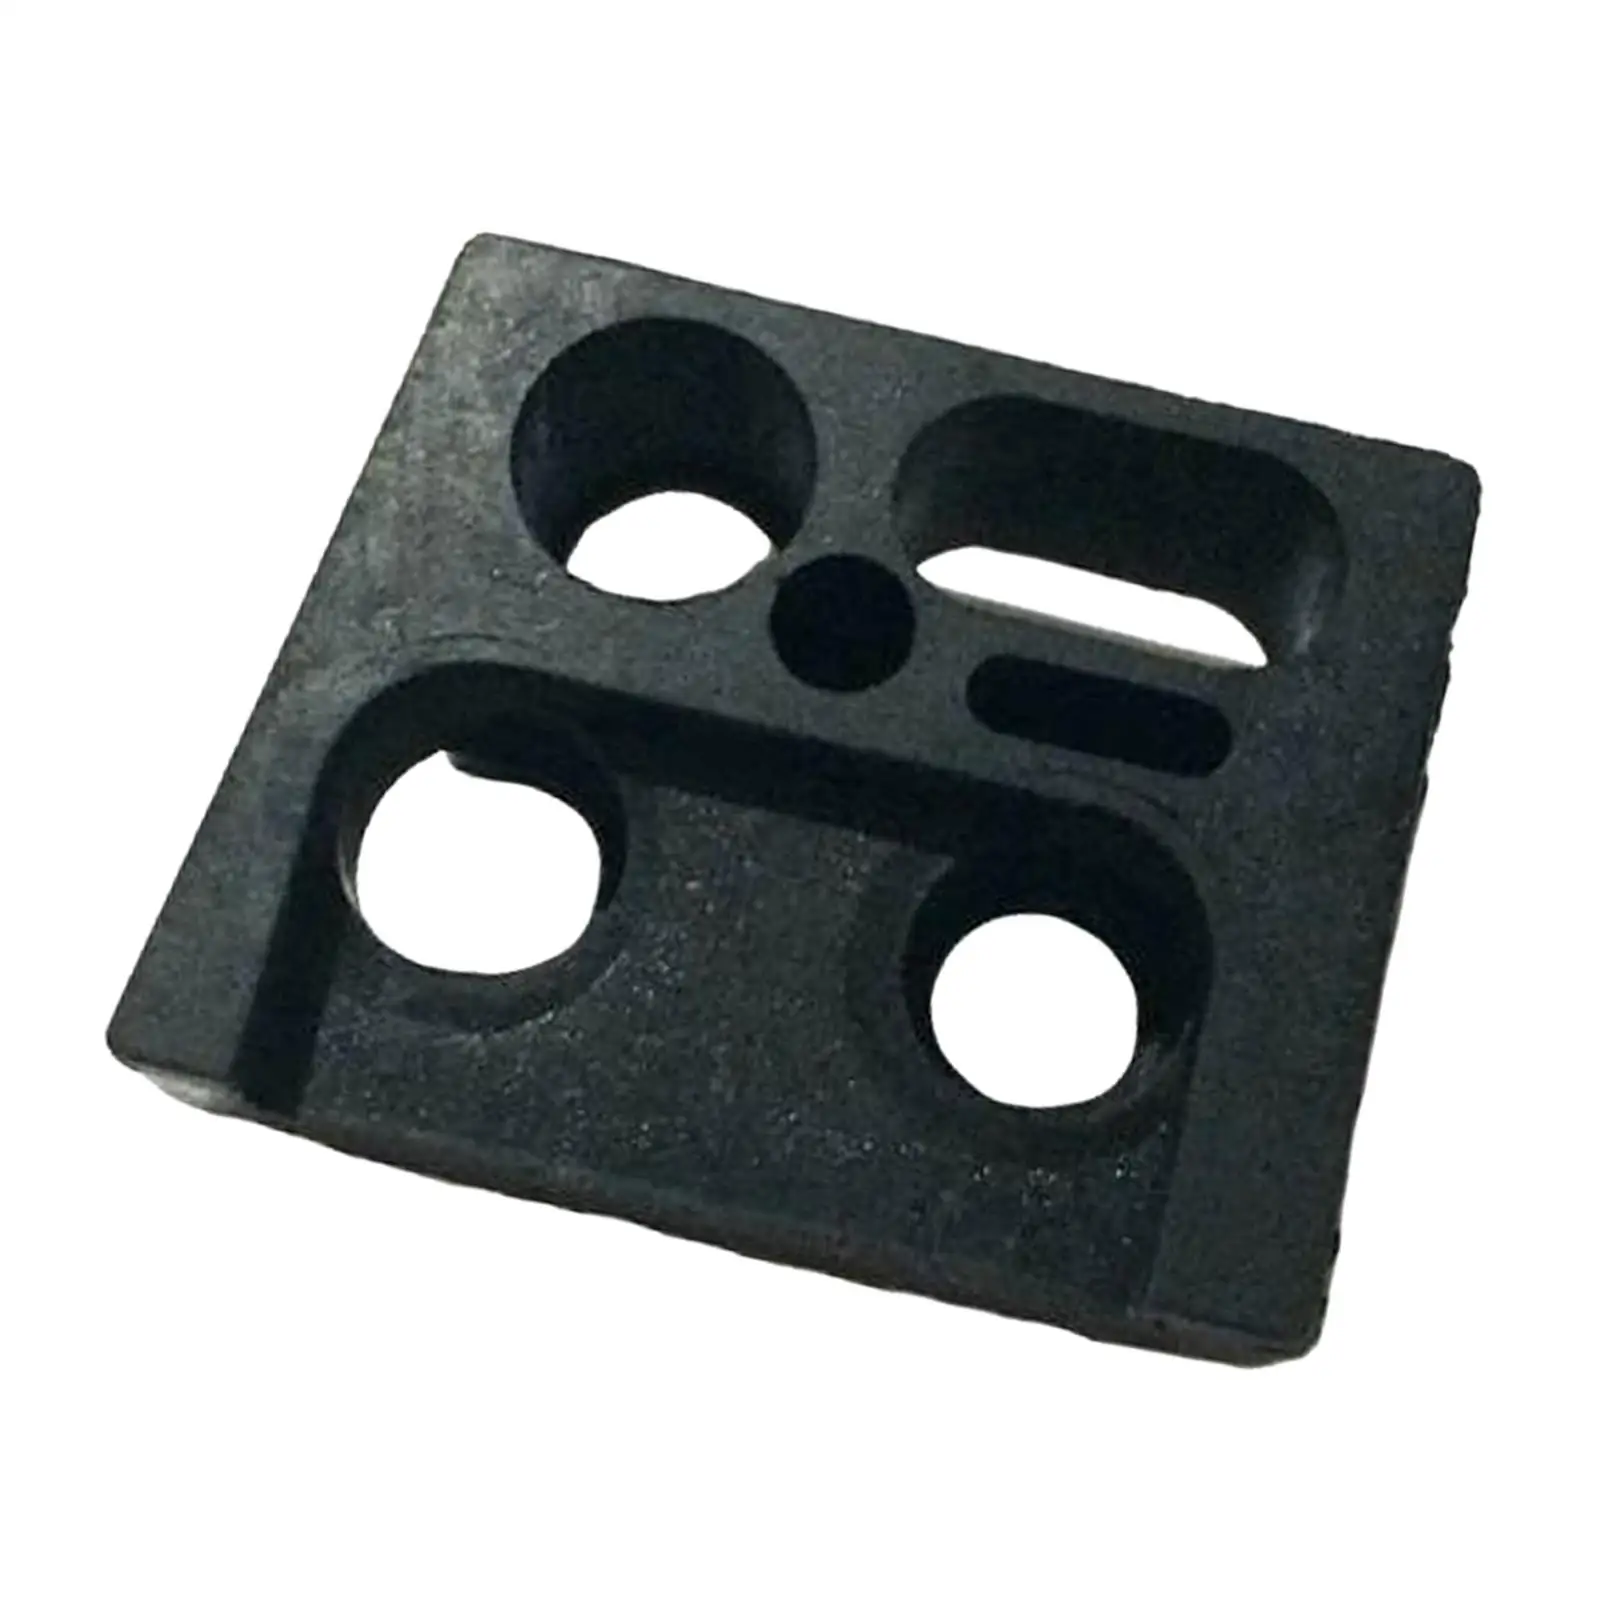 Black Rubber Grommet 66T-42725-30-00 Easy Installation for Outboard Engine 40HP